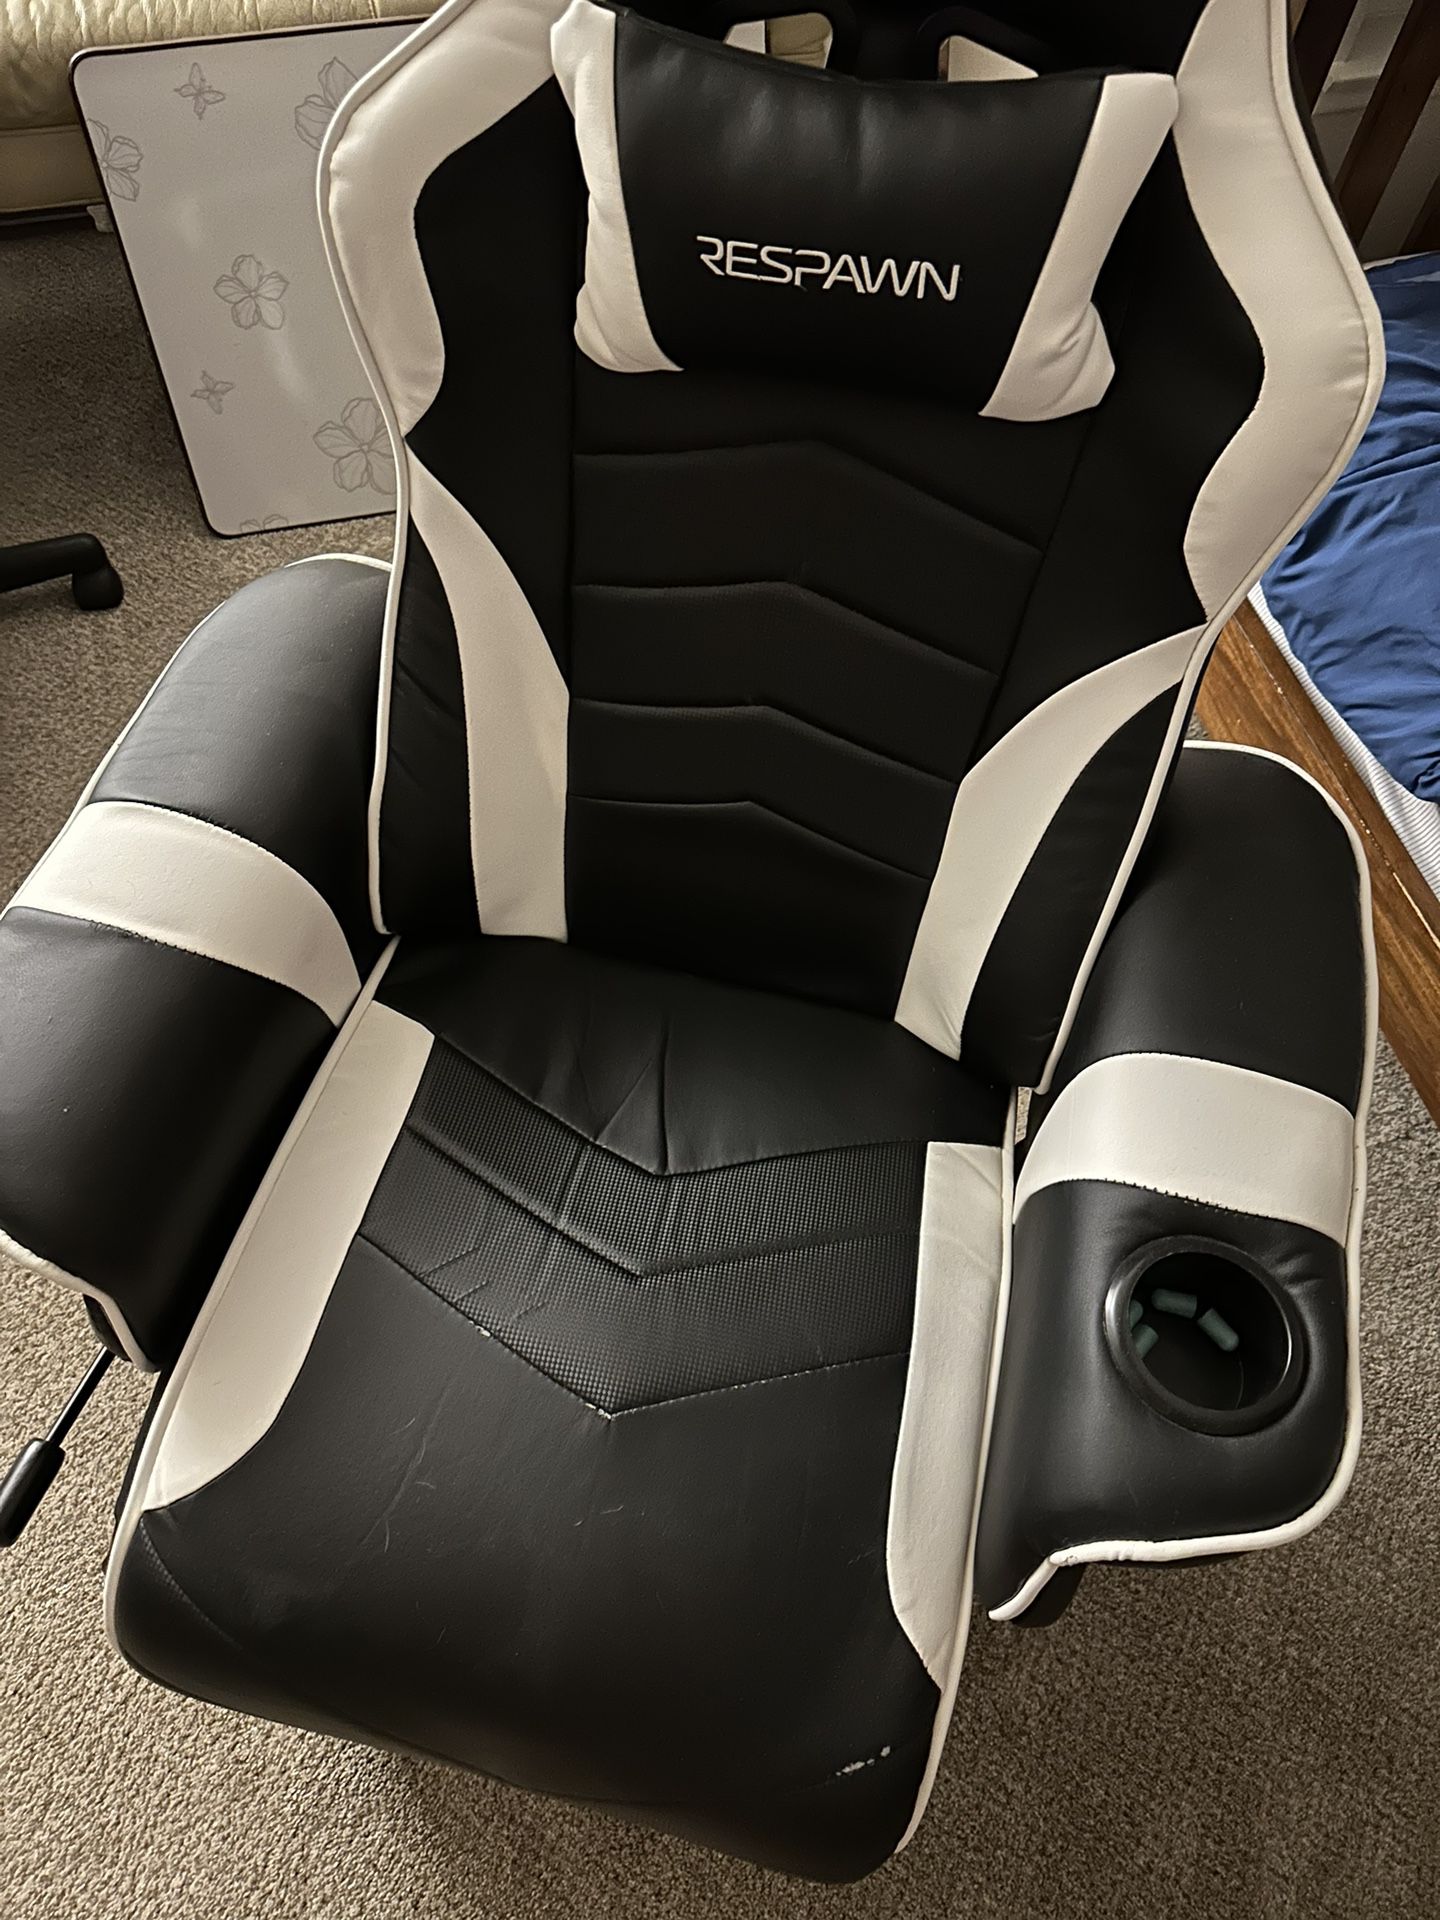 Respawn gaming chair recliner 